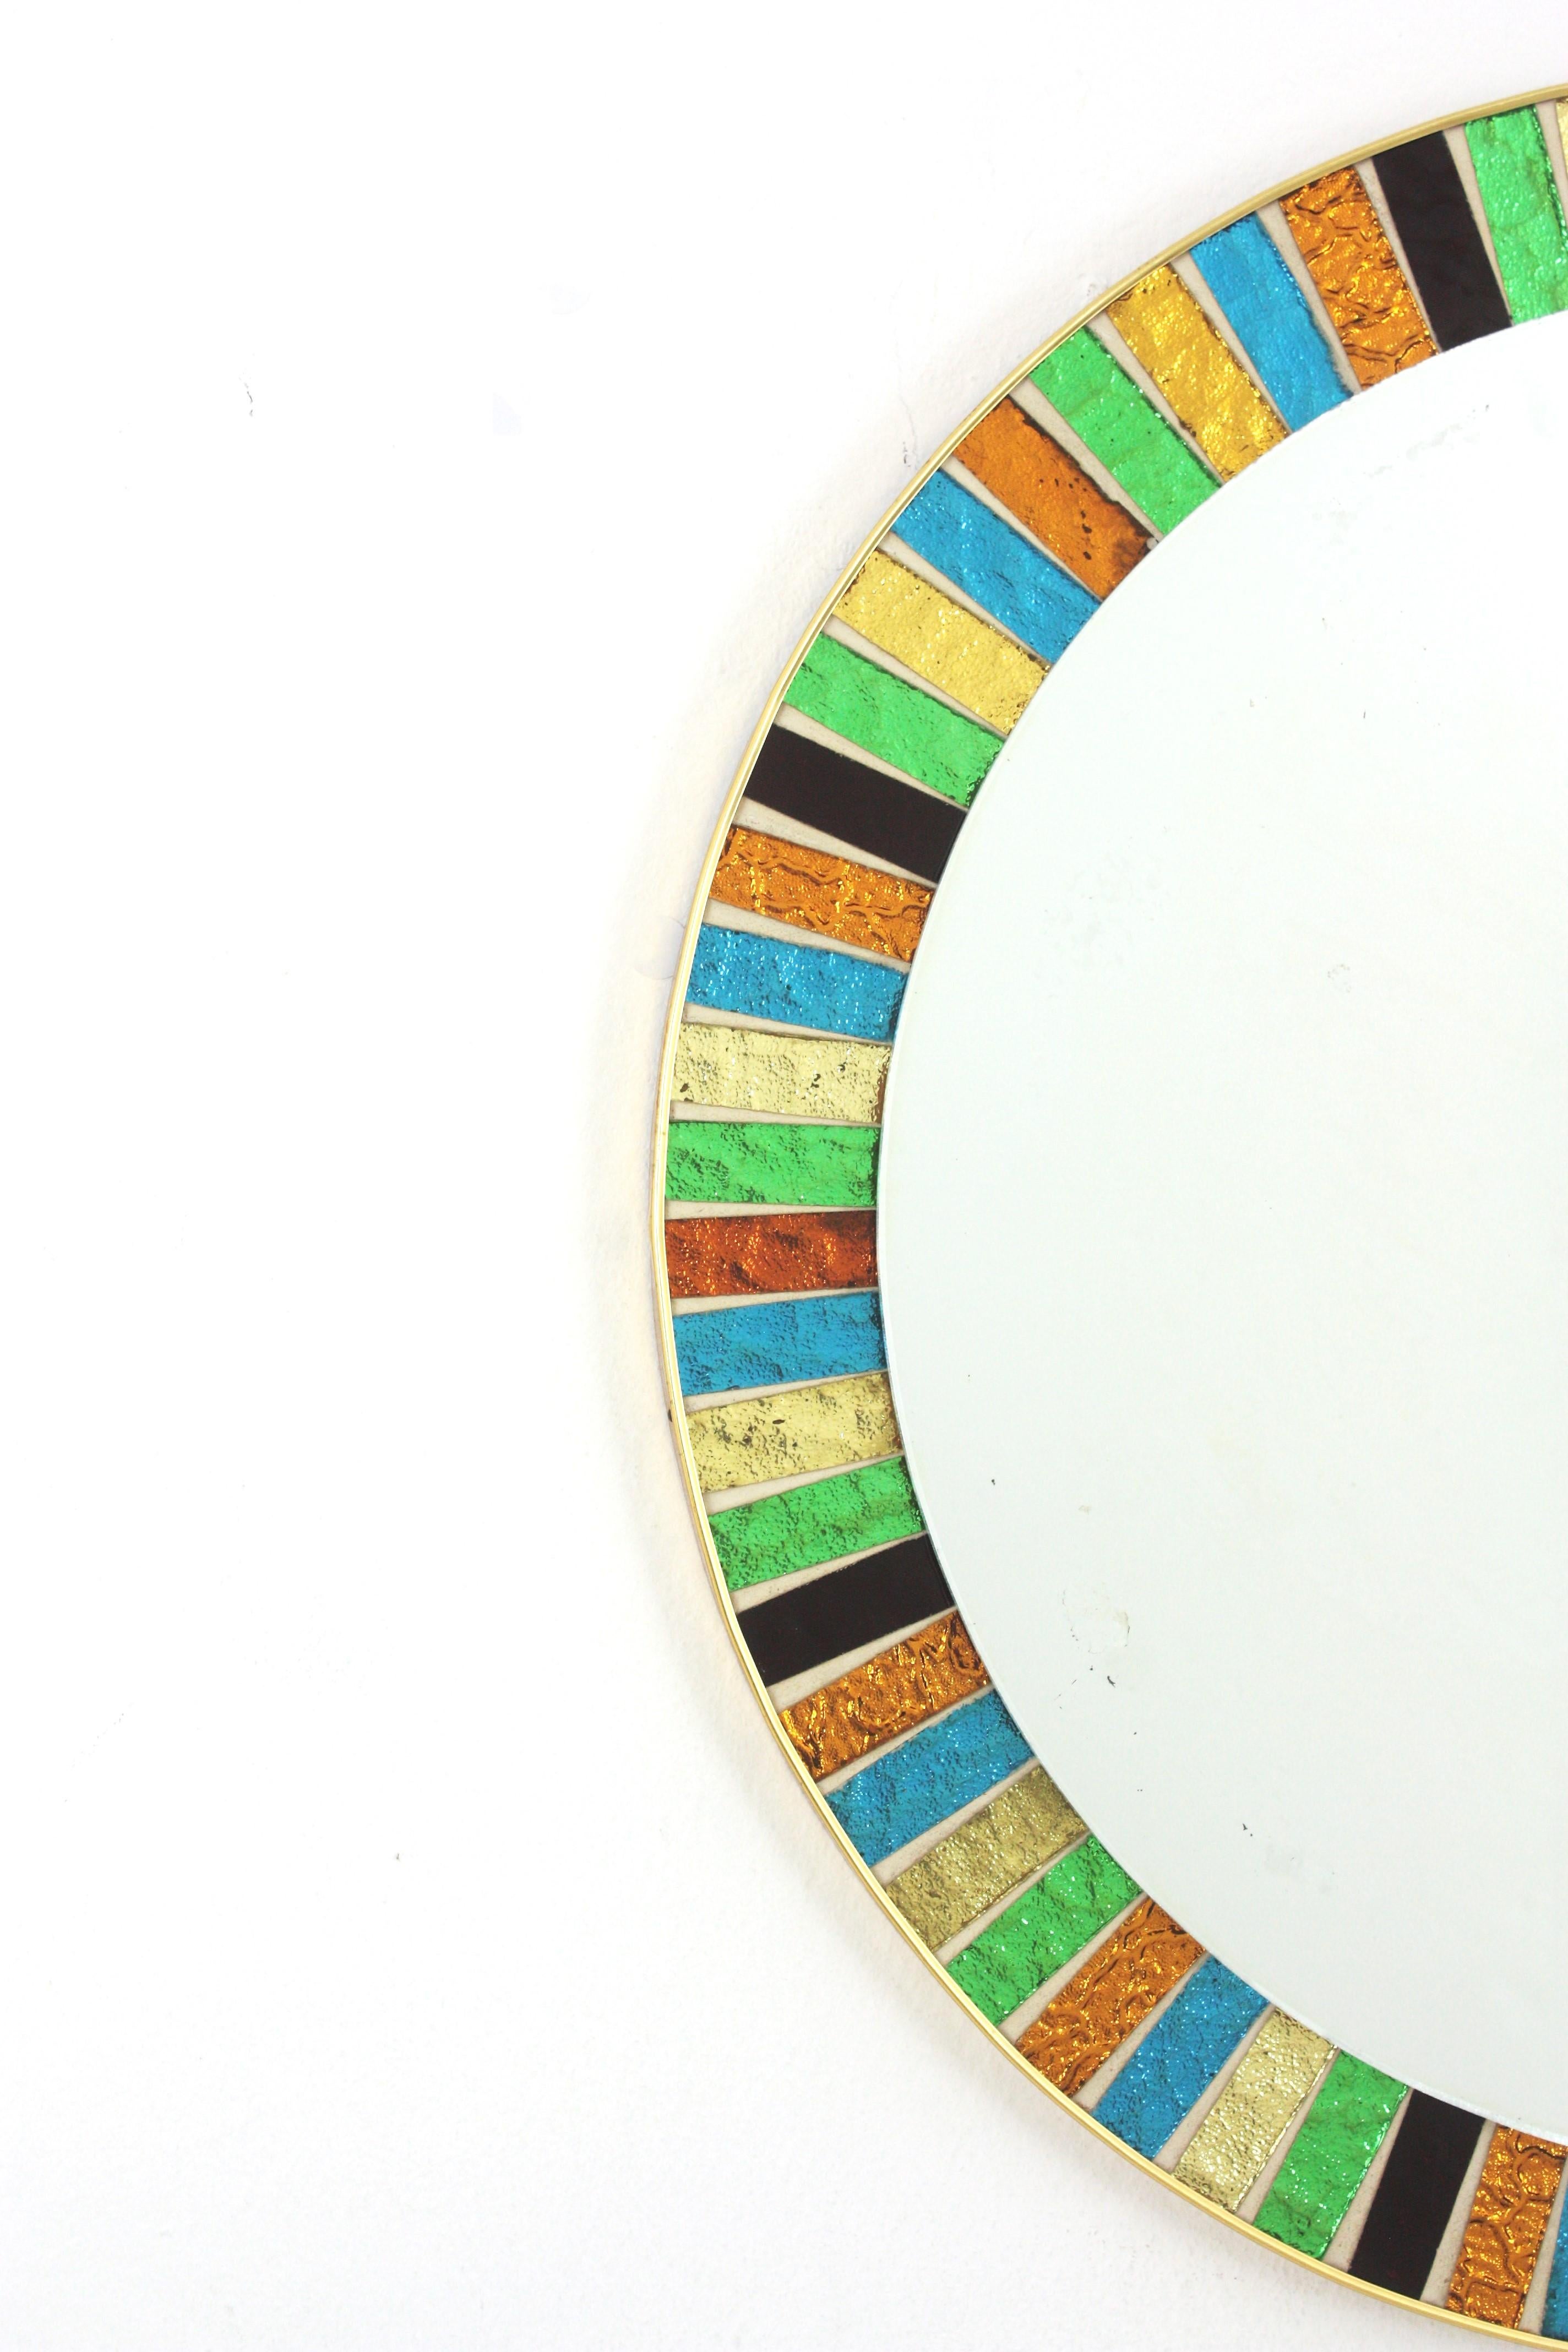 MDM Round Sunburst Mirror with Multicolor Glass Mosaic Frame In Good Condition For Sale In Barcelona, ES